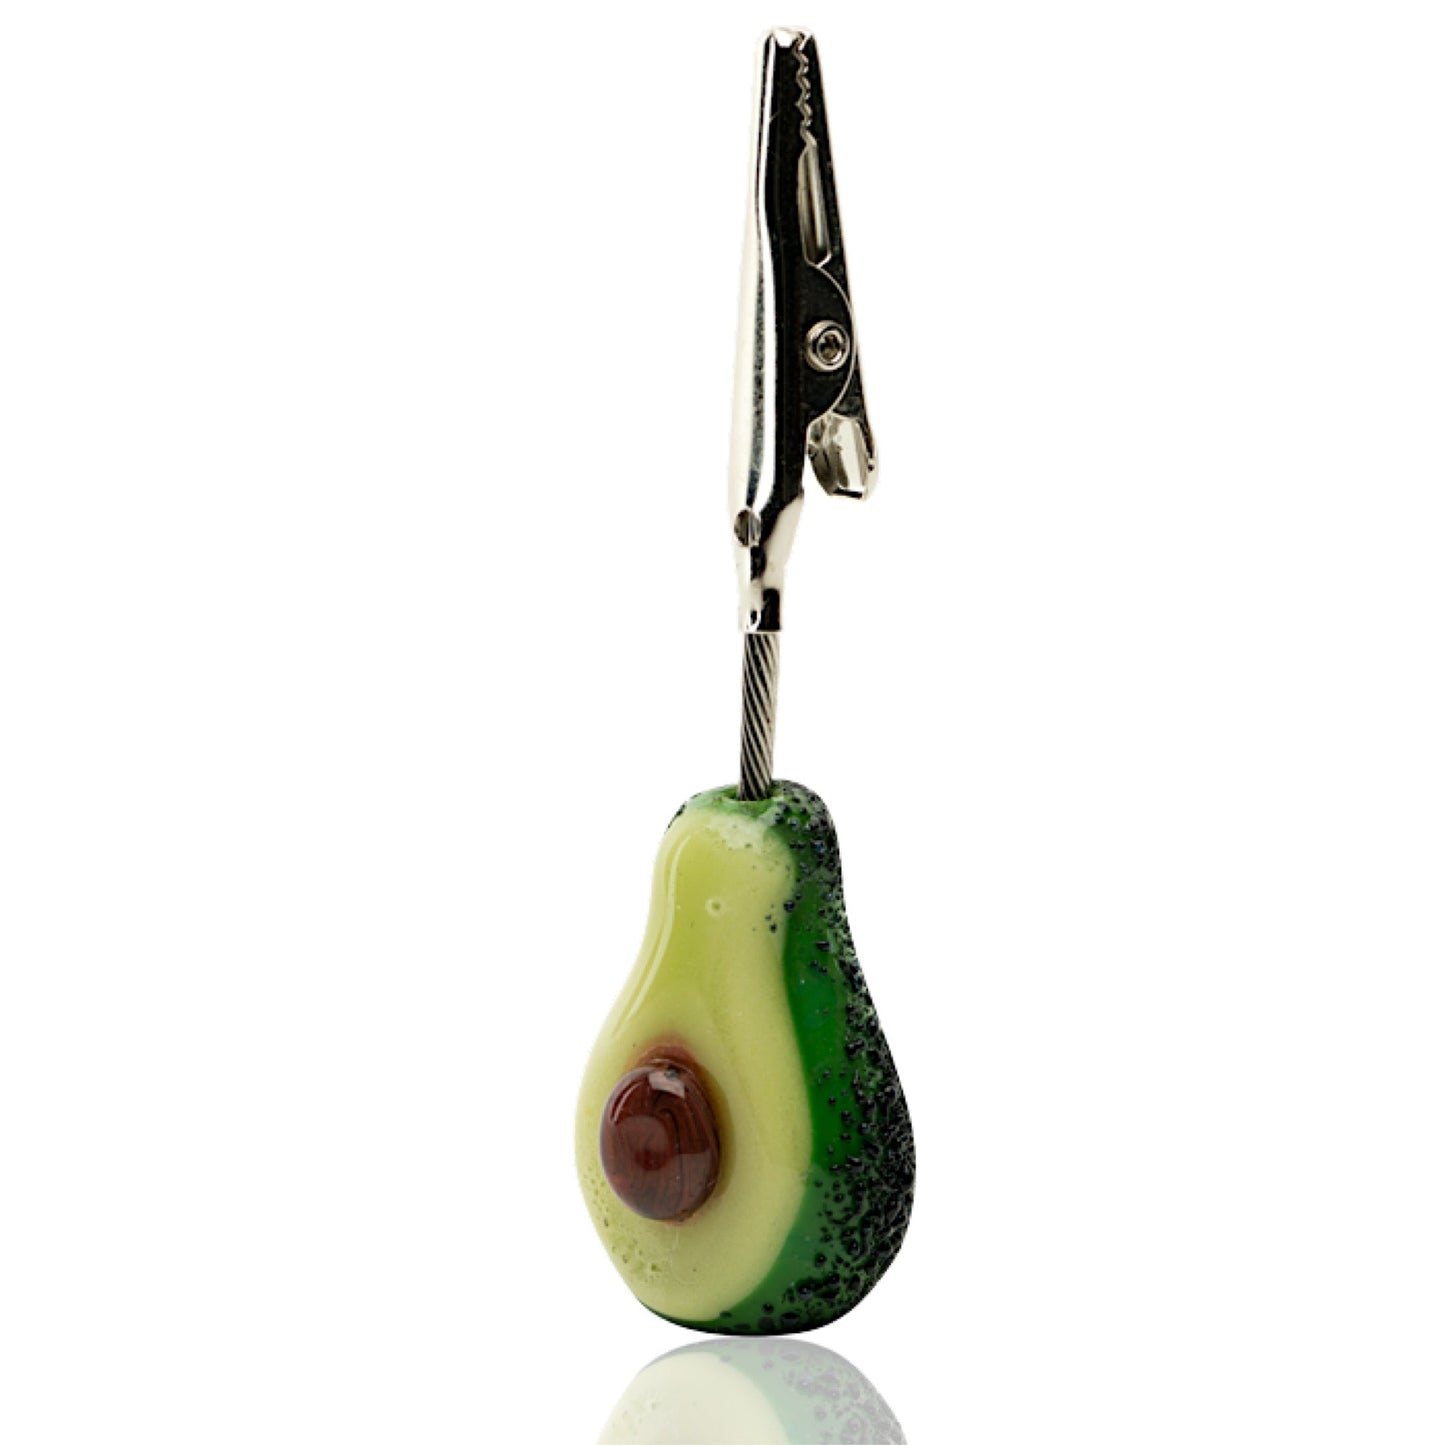 Empire Glassworks “Avocadope” Roach Clip 🥑 by Empire Glassworks | Mission Dispensary